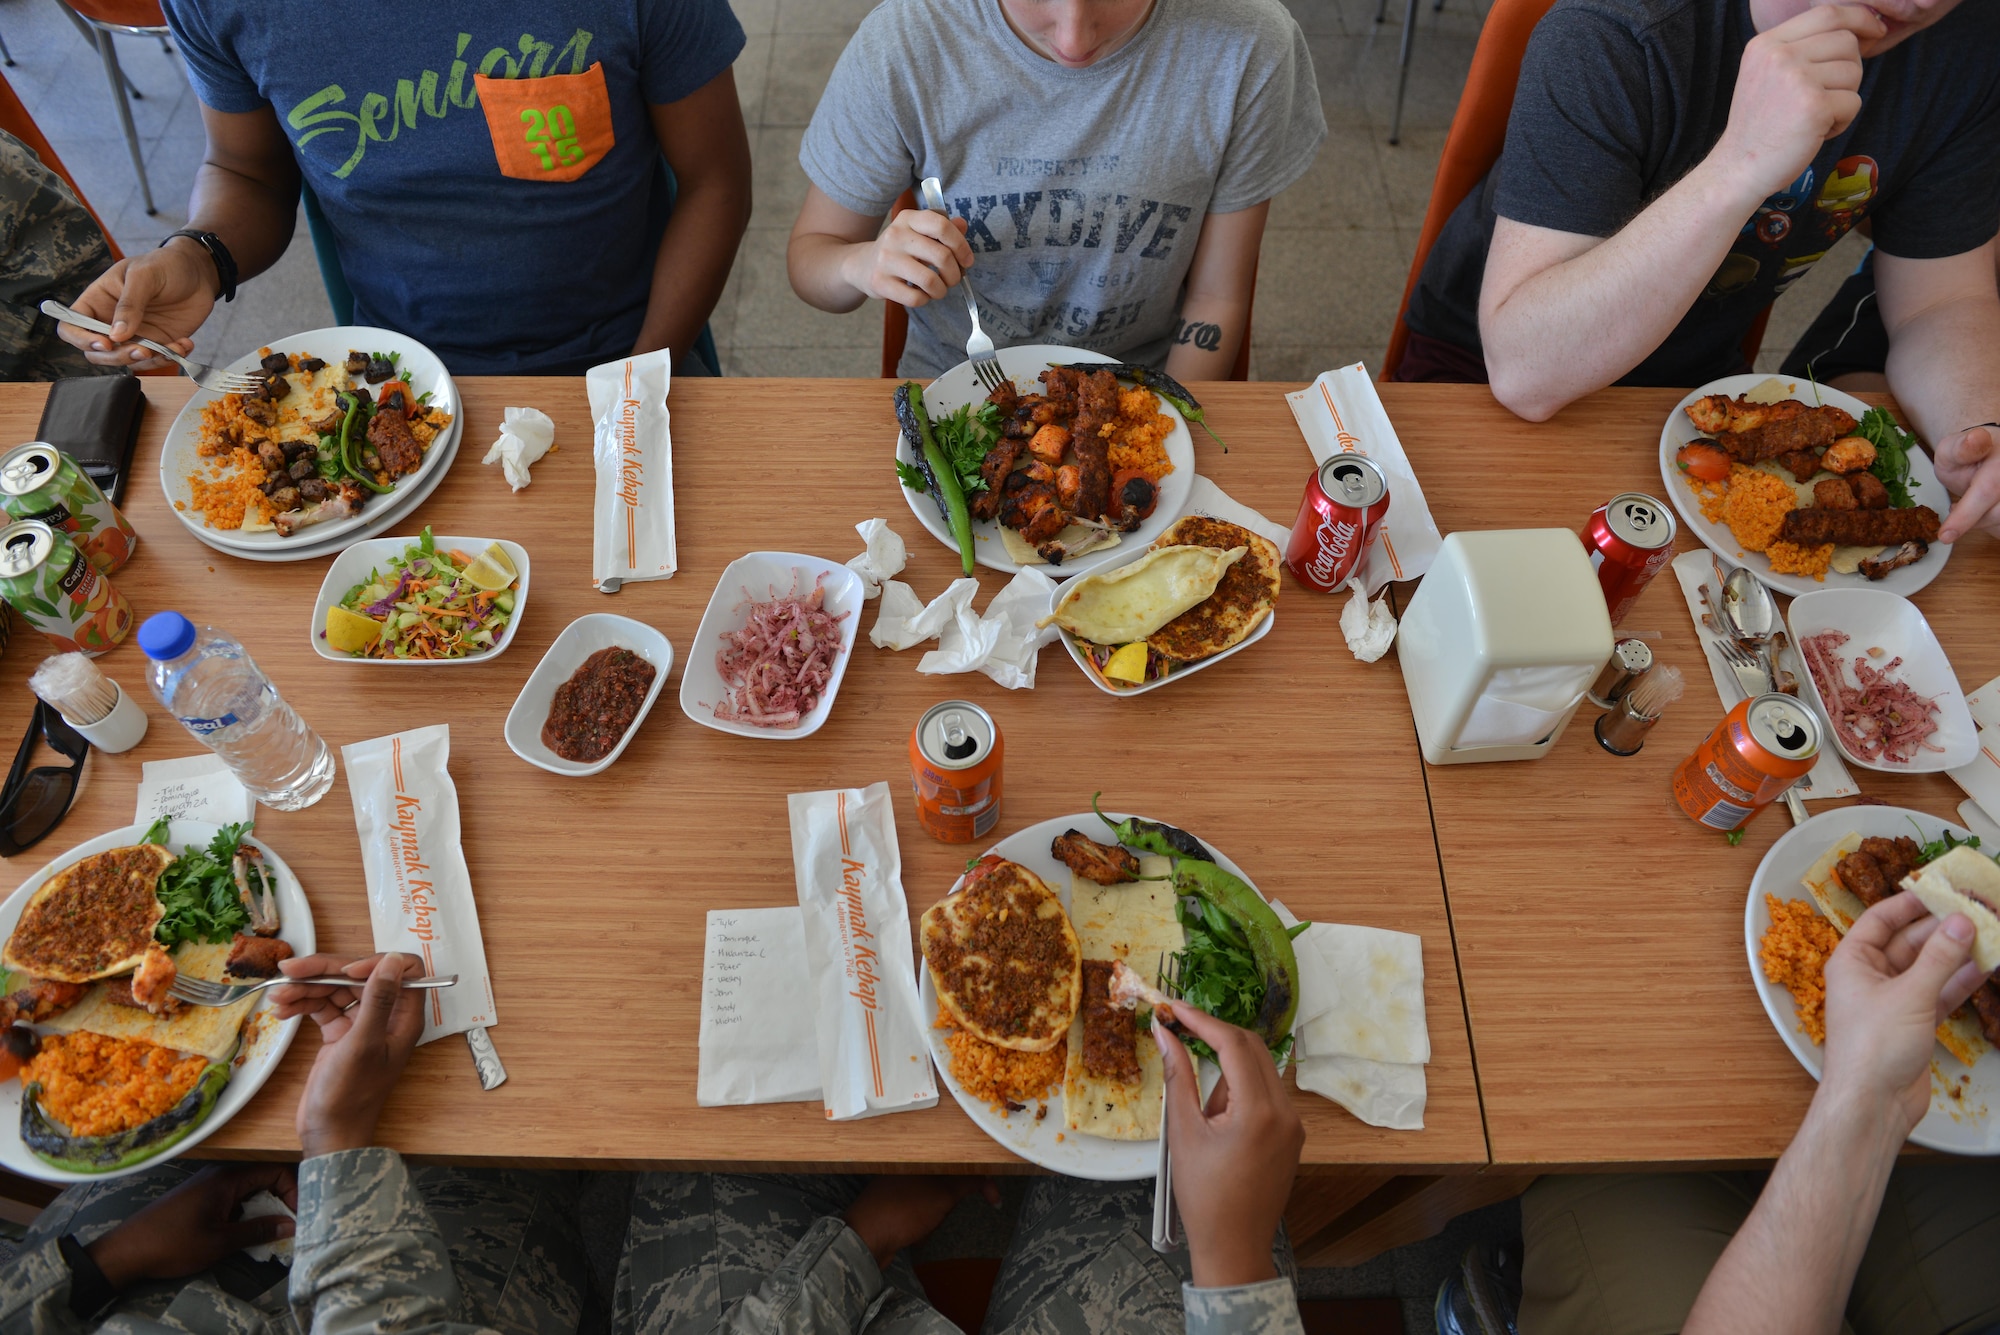 U.S. Airmen eat Turkish food together during a spiritual lunch and learn, April 27, 2017, at Diyarbakir Air Base, Turkey. During the luncheon, Airmen learned about each other’s values. (U.S. Air Force photo by Senior Airman John Nieves Camacho)